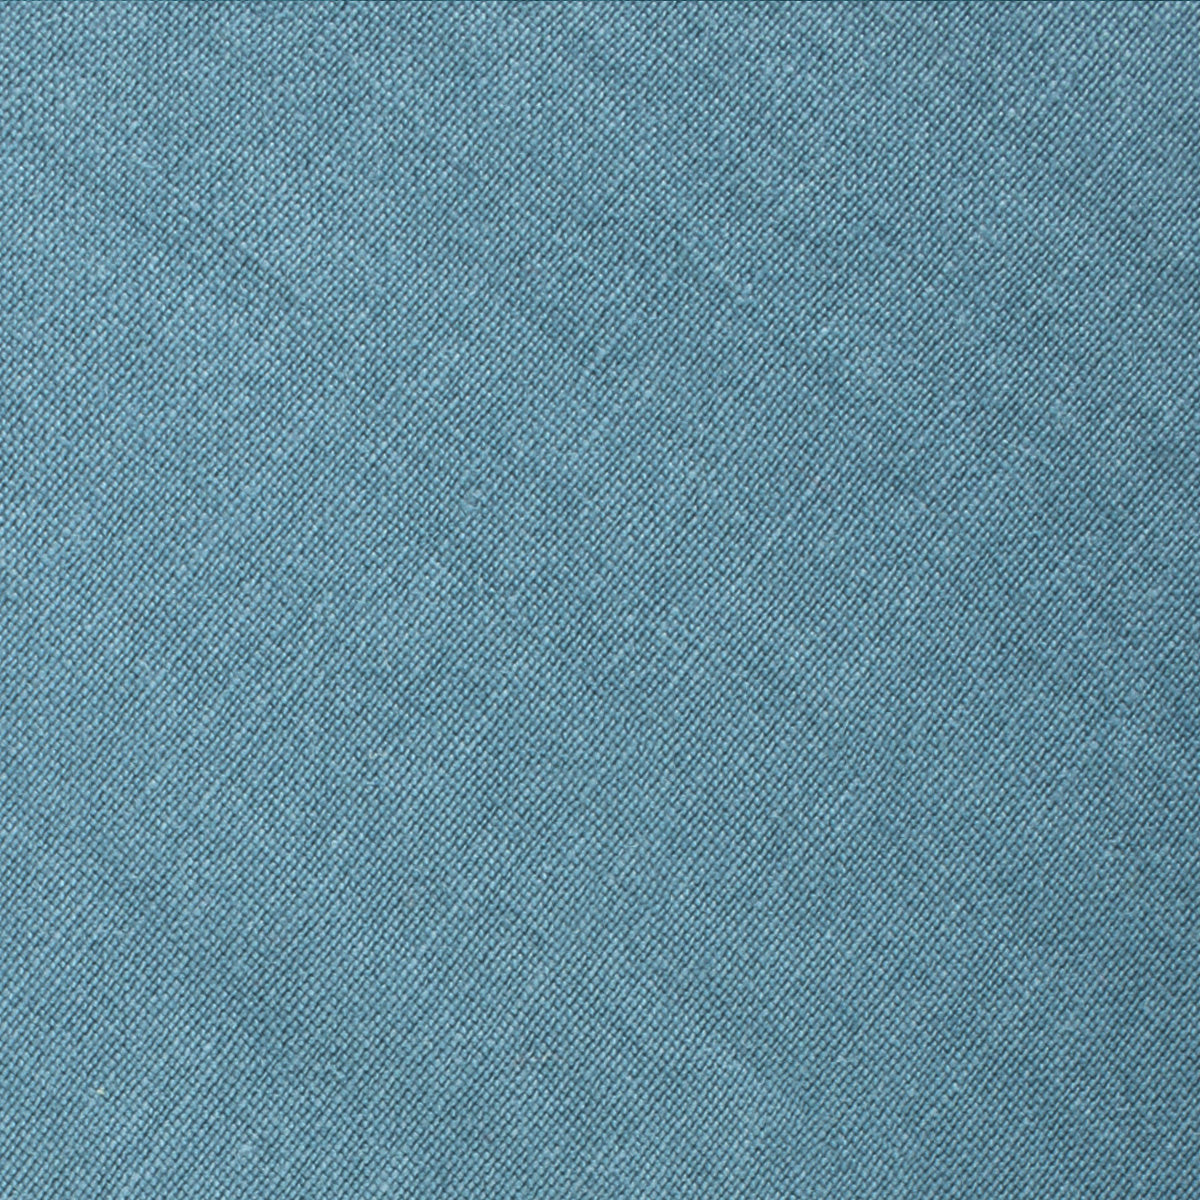 Dusty Teal Blue Linen Fabric Swatch